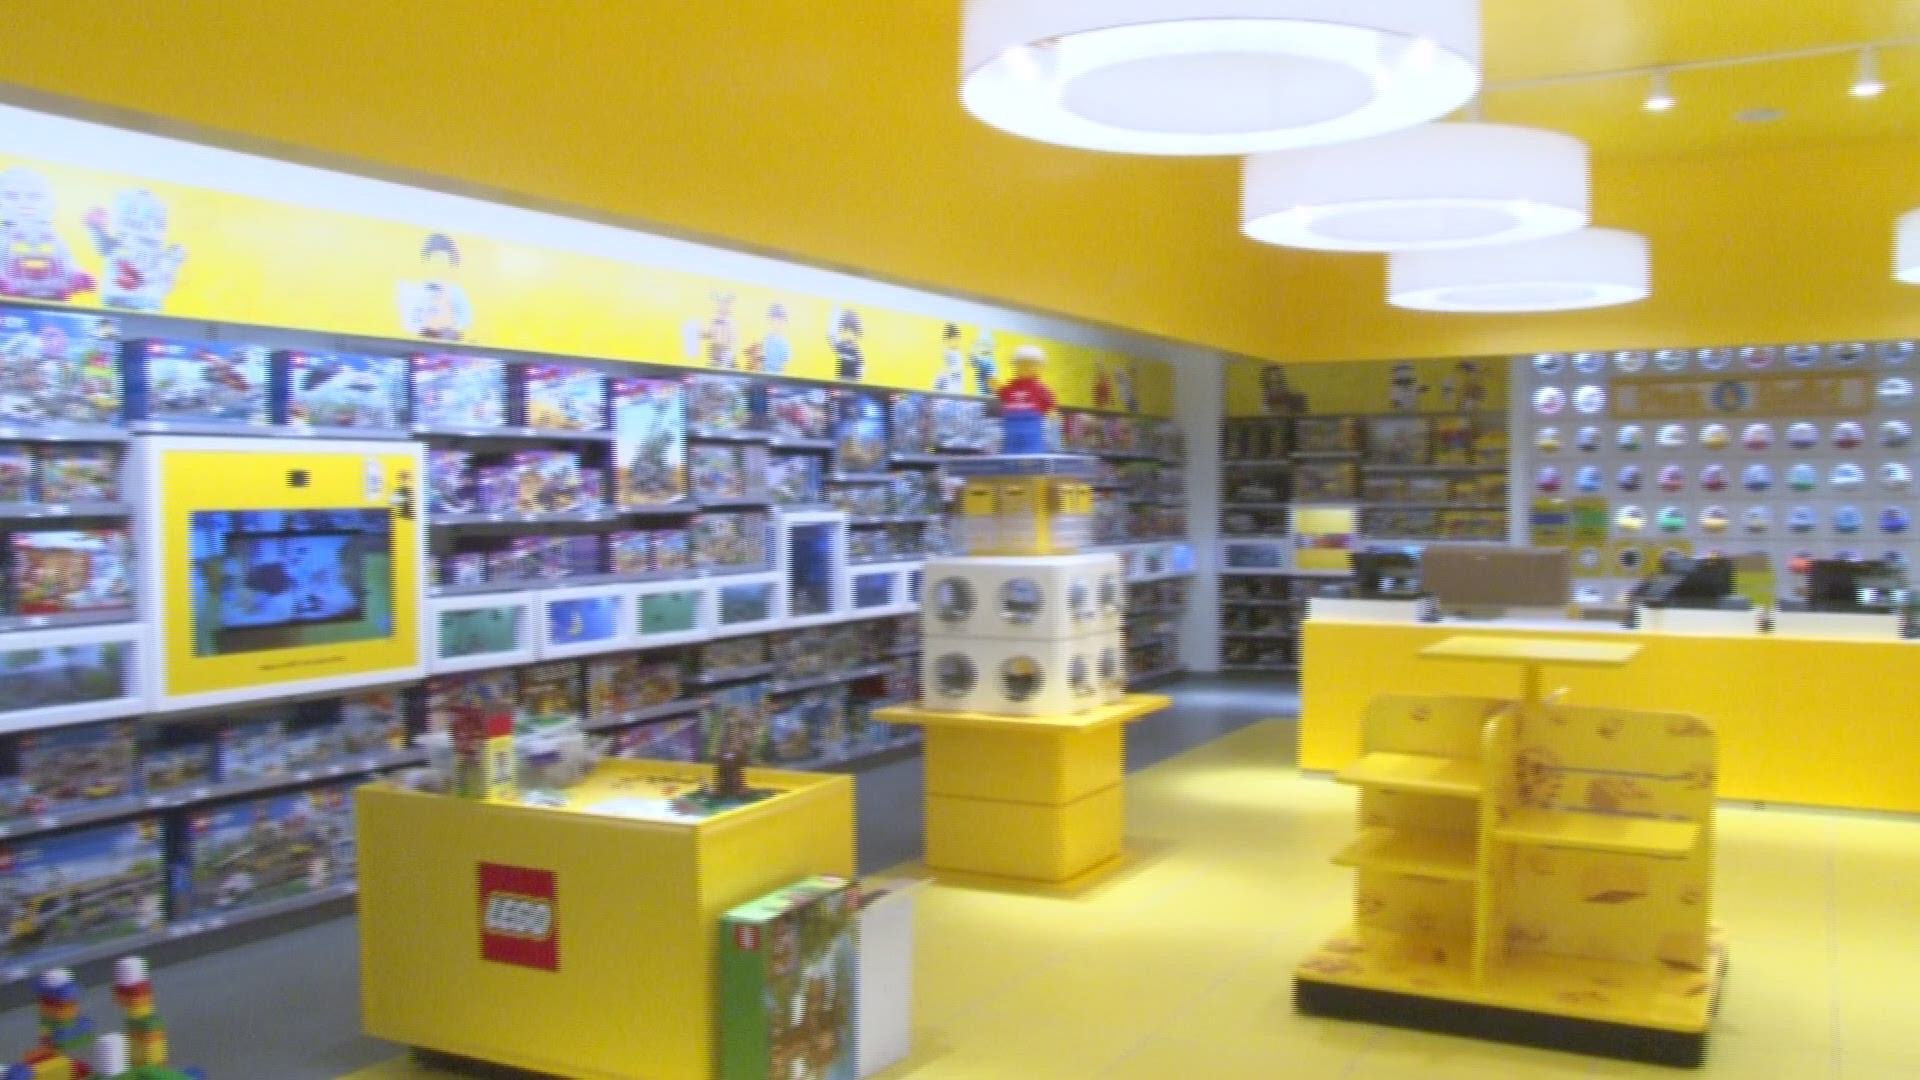 It’s time to embrace your inner kid. The new LEGO store just opened its doors at the St. Johns Town Center.